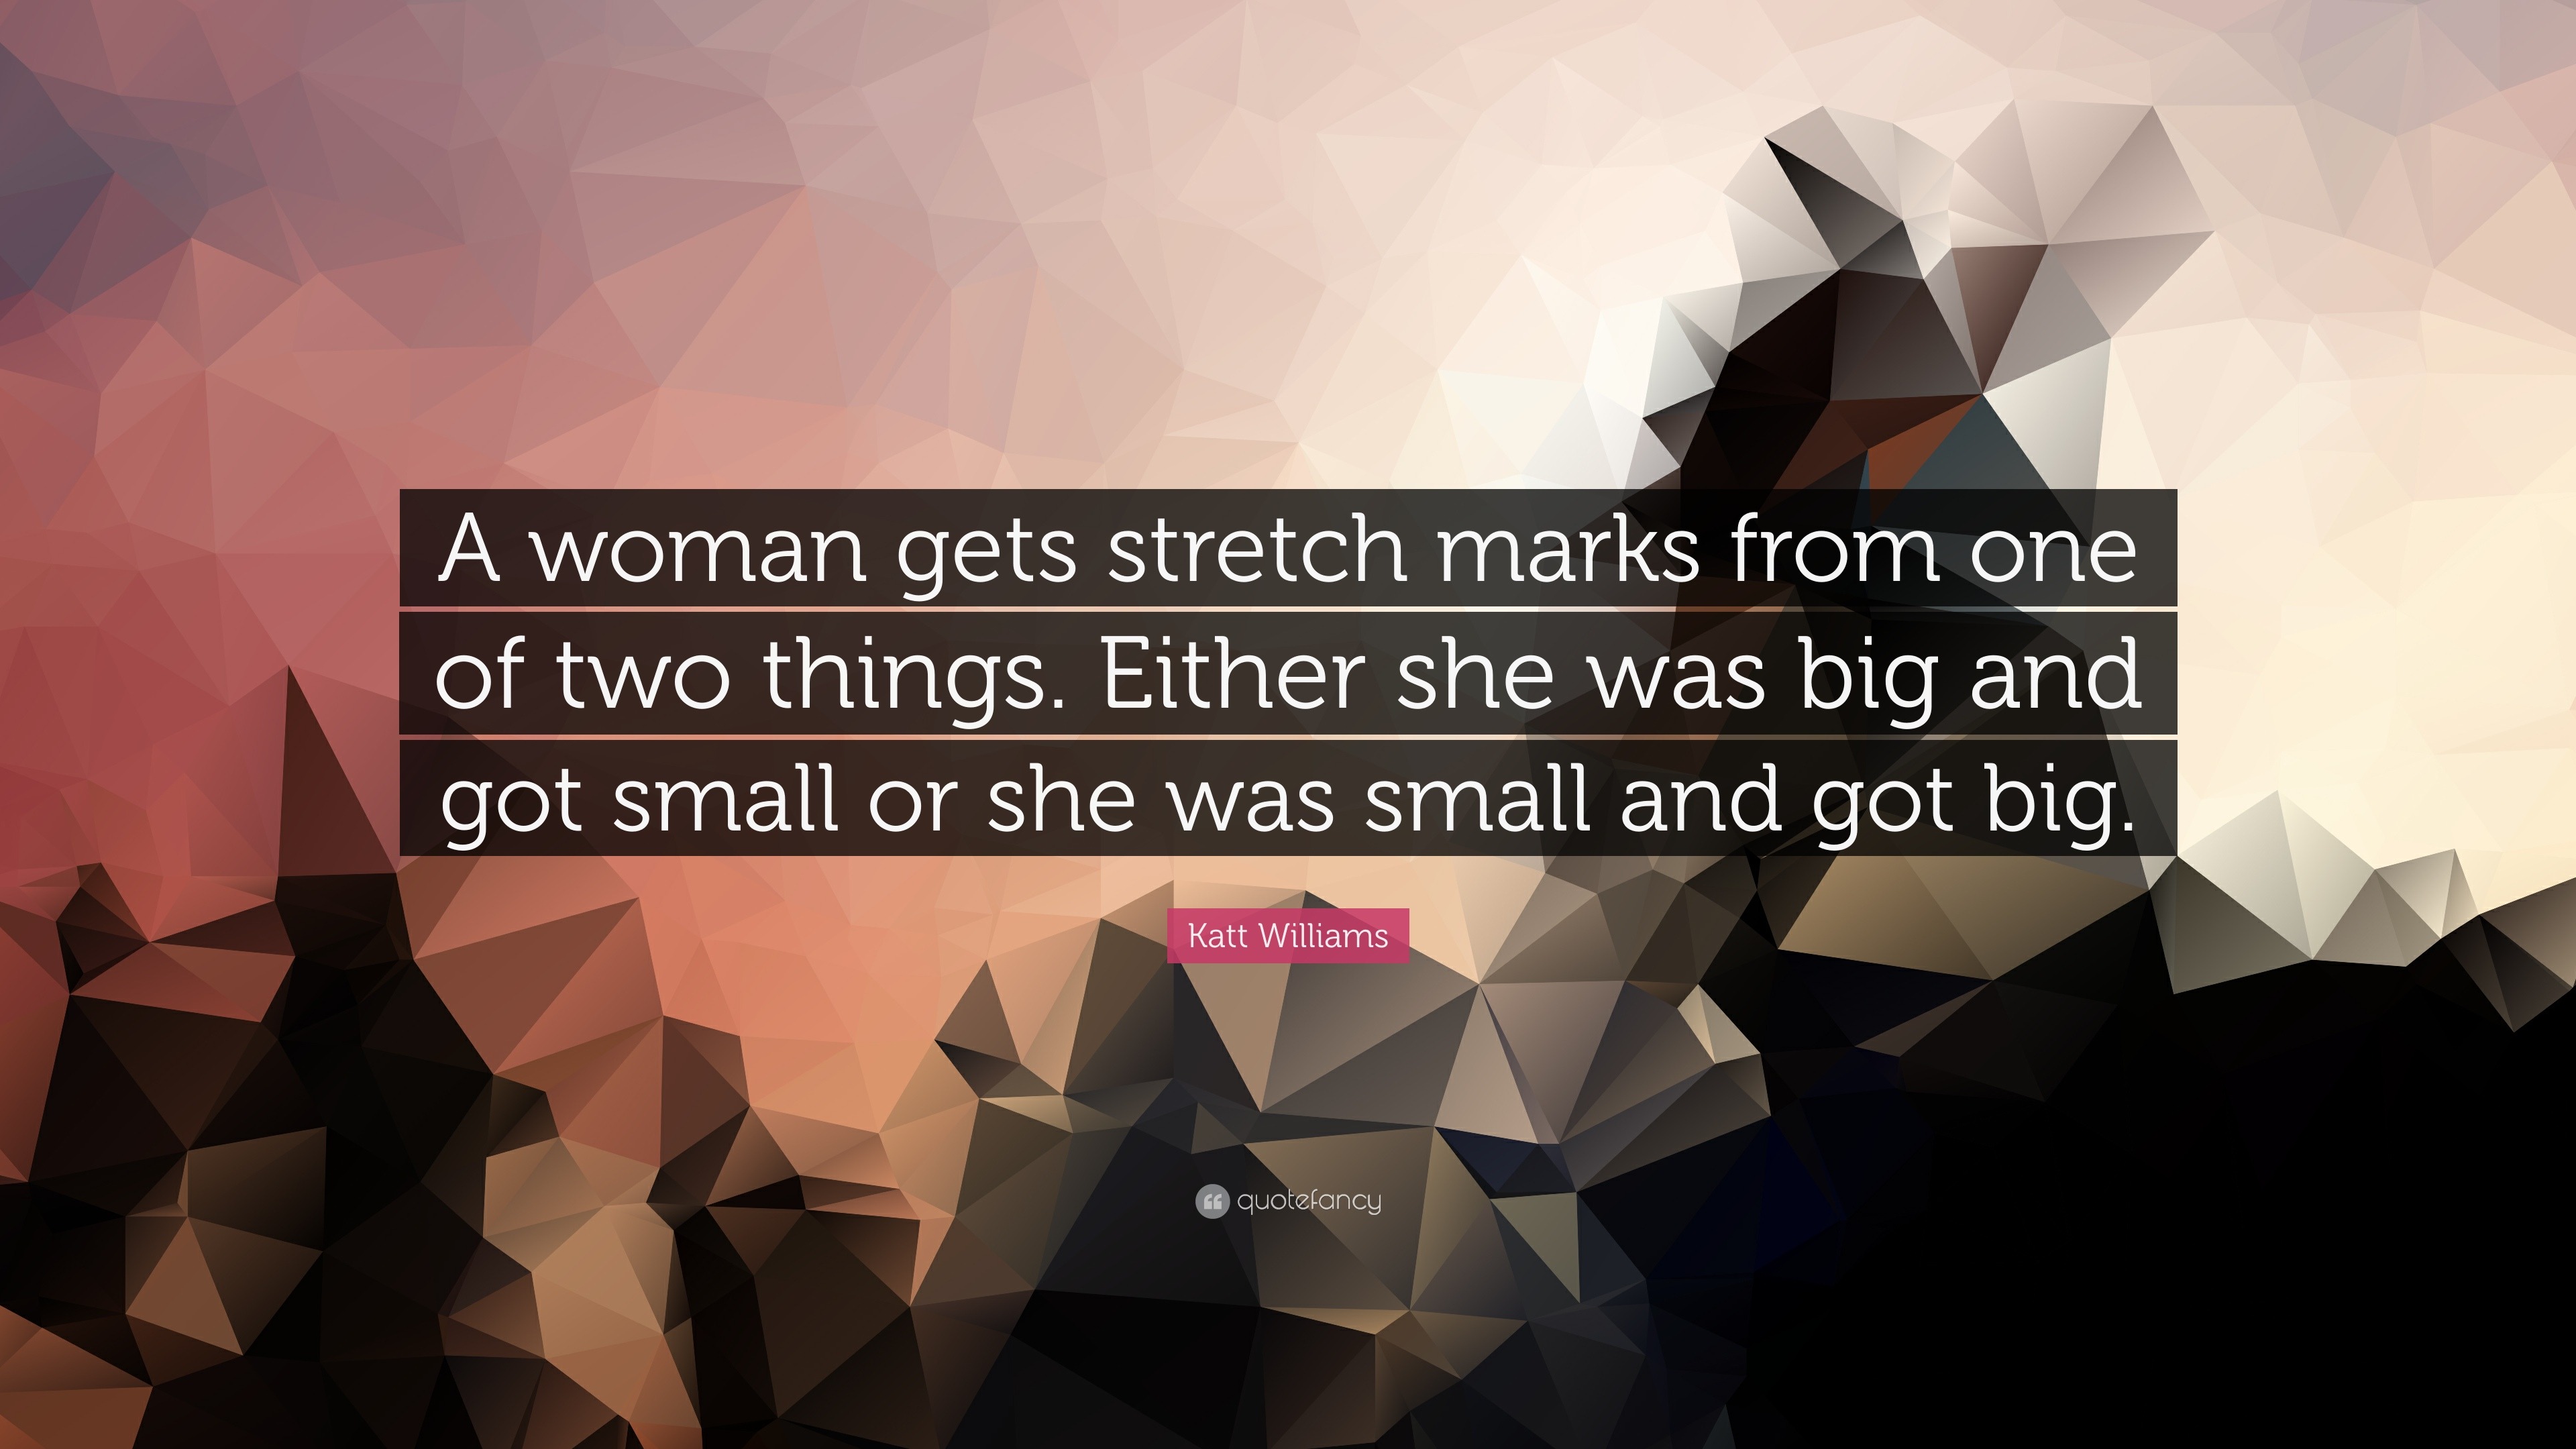 mundstykke ketcher psykologisk Katt Williams Quote: “A woman gets stretch marks from one of two things.  Either she was